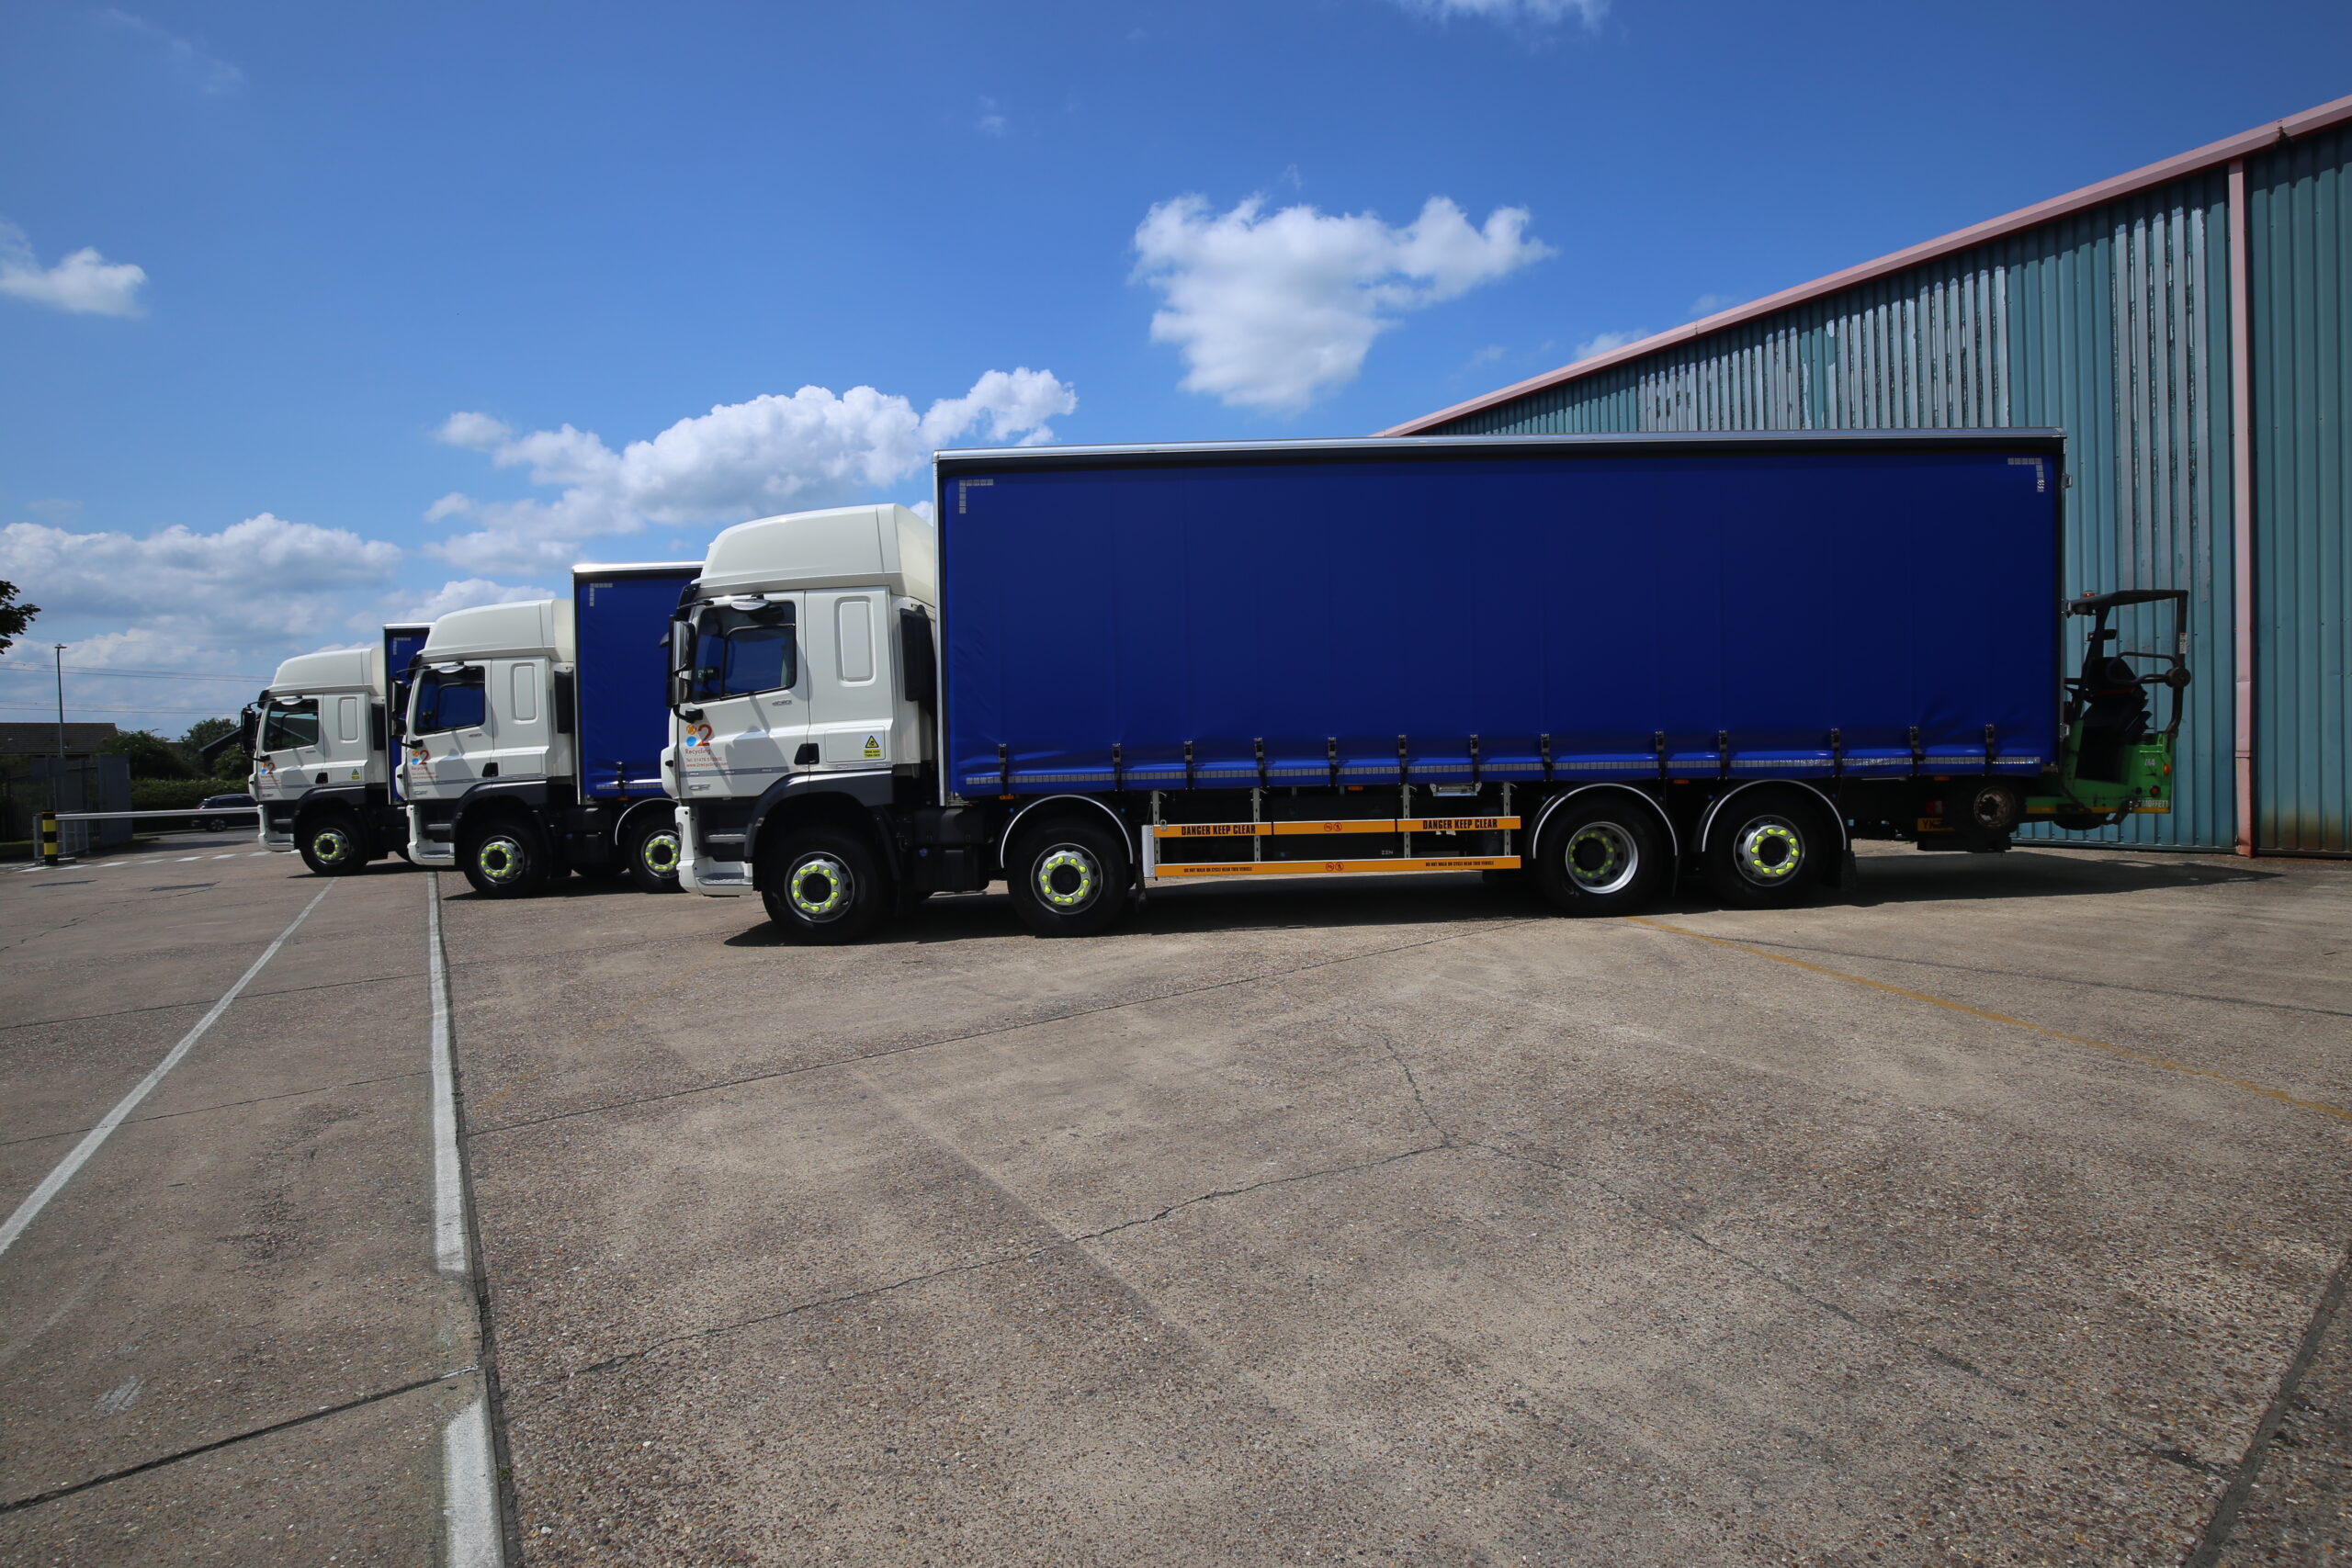 2 Recycling Collection vehicles with mounted forklift